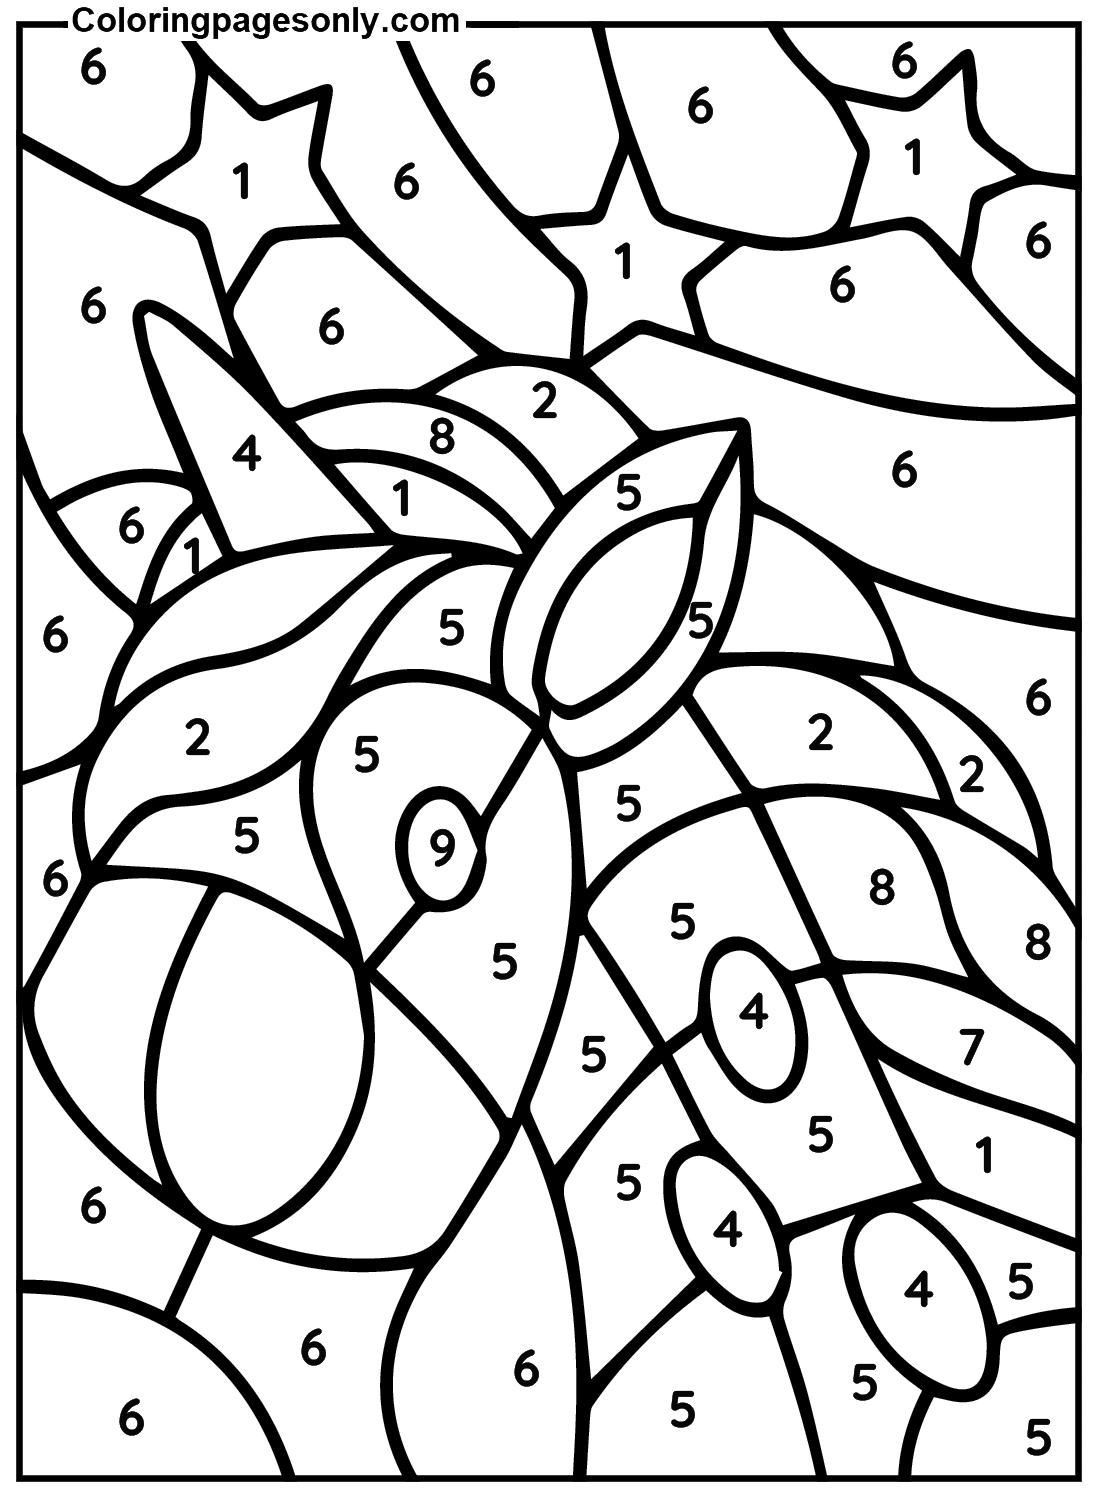 Printable Color By Number Unicorn Coloring Pages